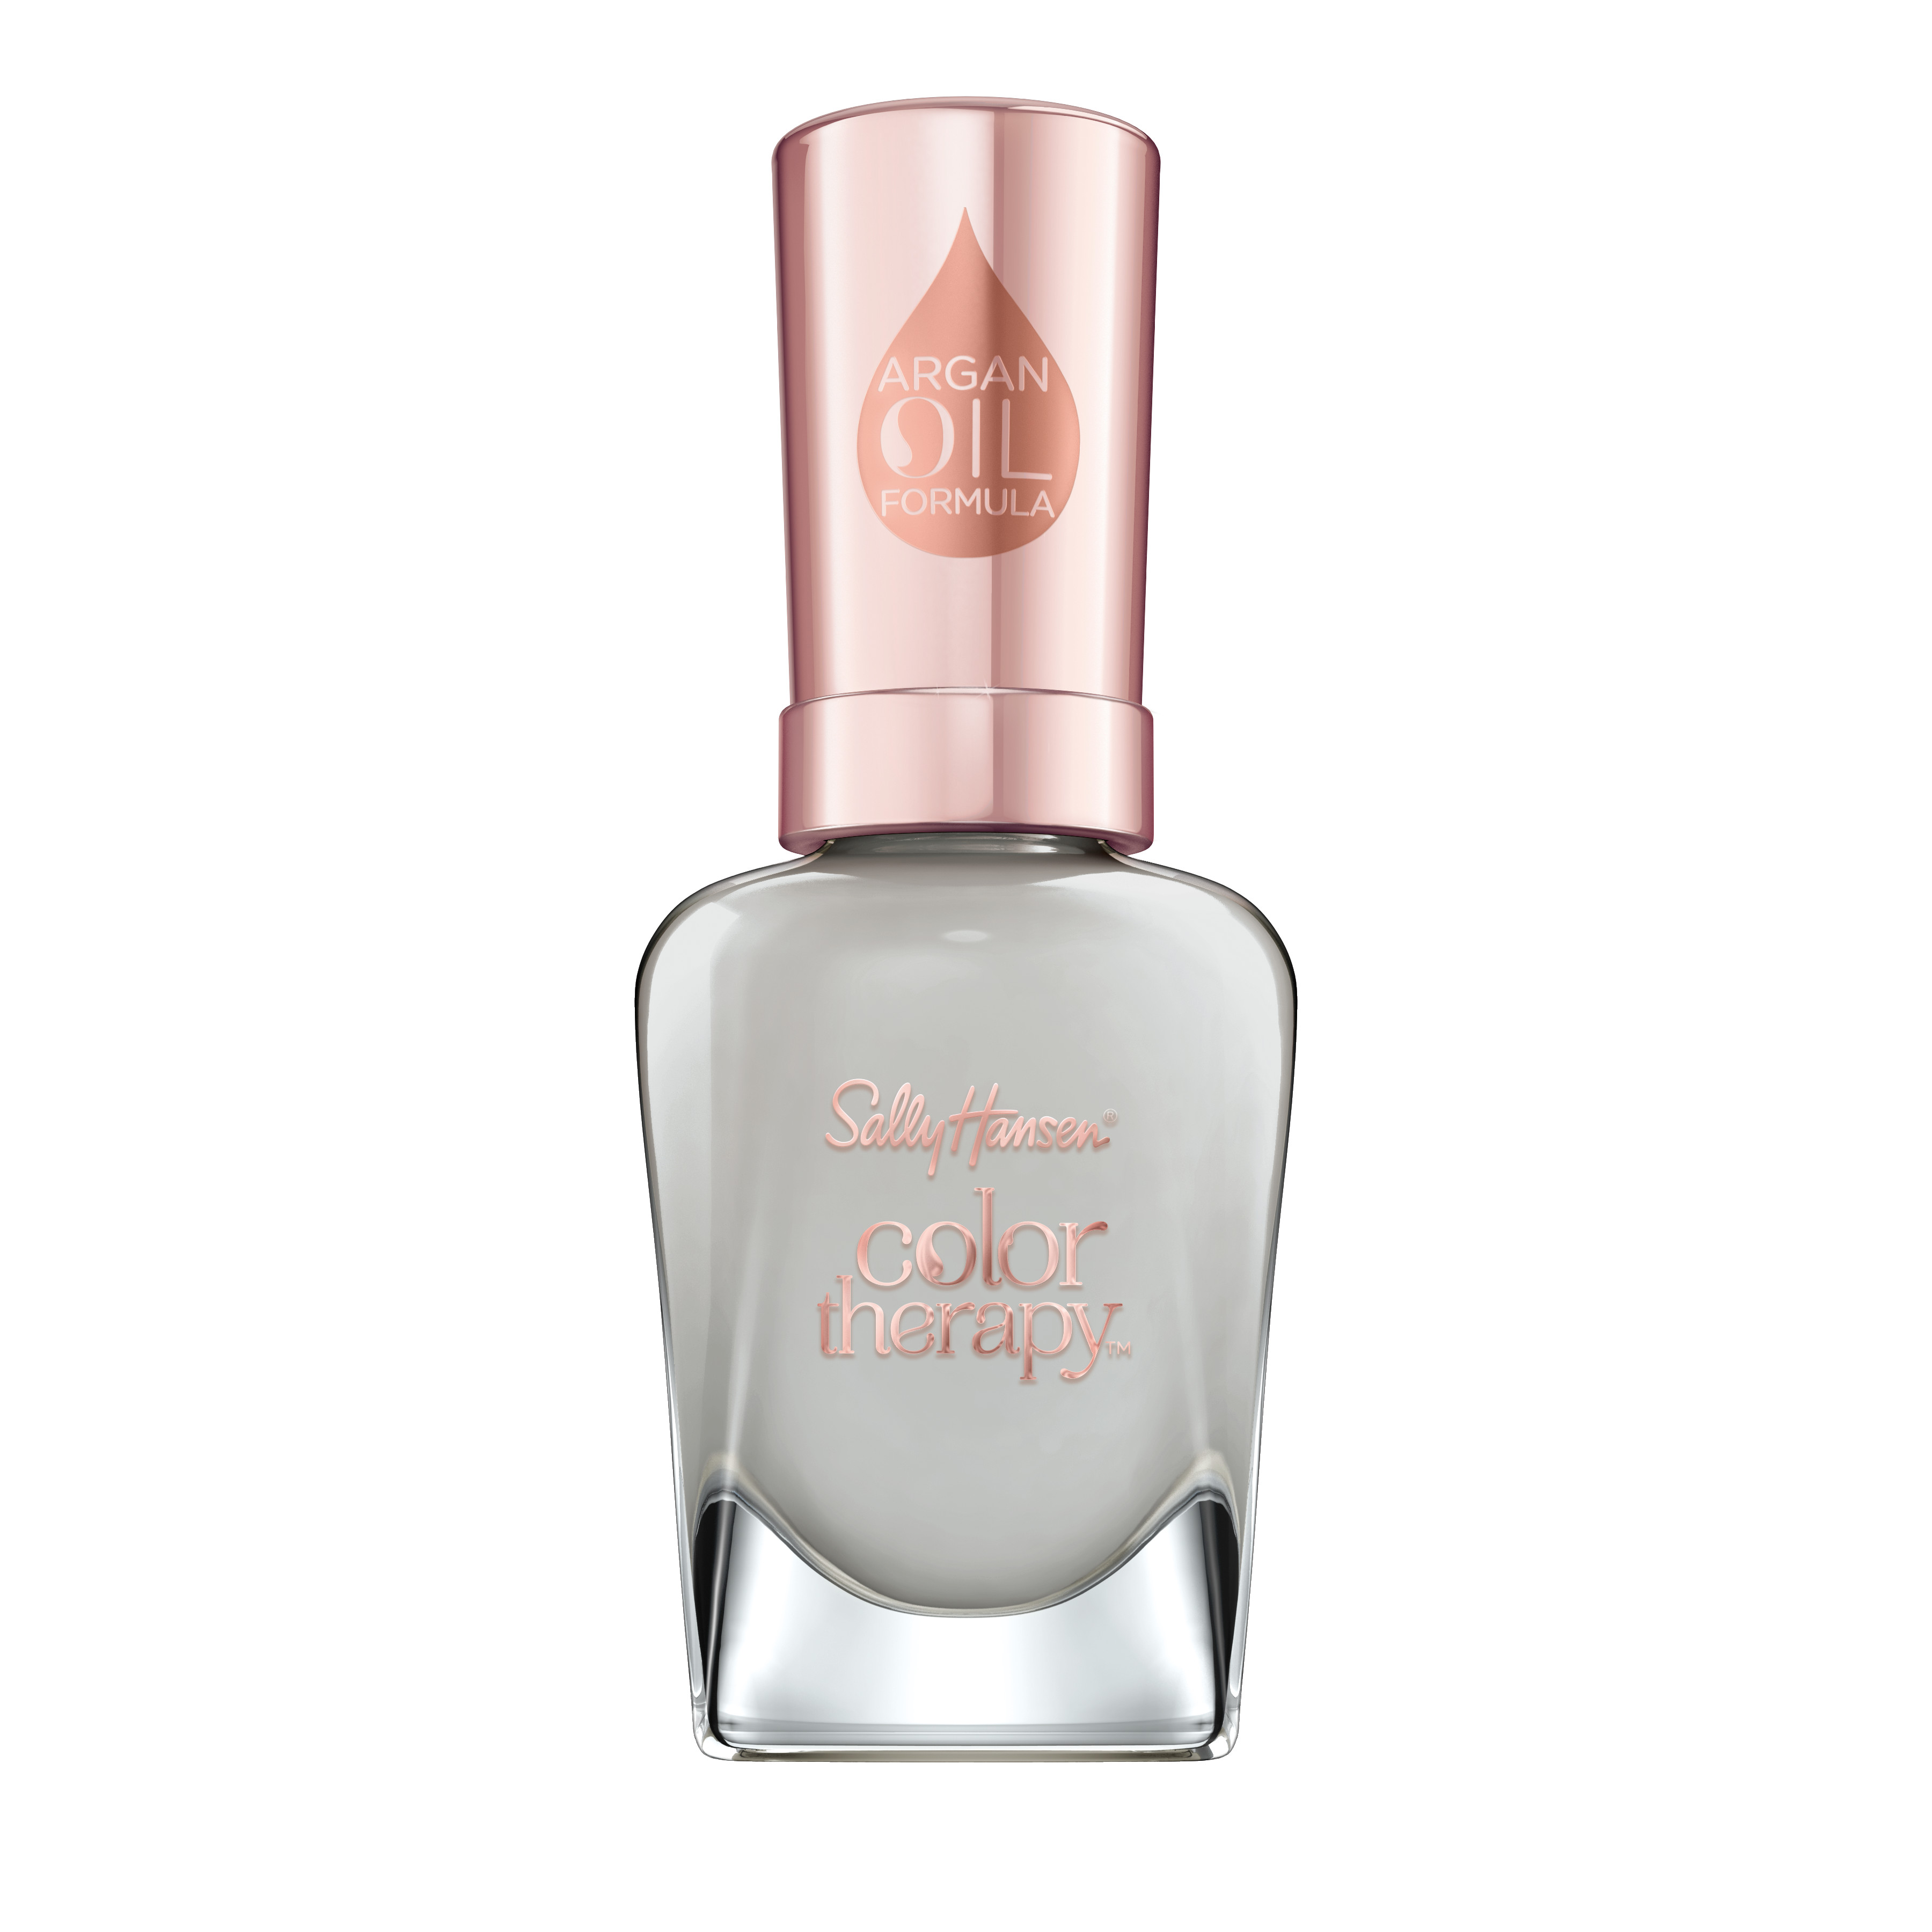 Sally Hansen Color Therapy Nail Color, Namas-Grey, 0.5 oz, Color Nail Polish, Nail Polish, Nail Polish Colors, Restorative, Argan Oil Formula, Instantly Moisturizes - image 1 of 13